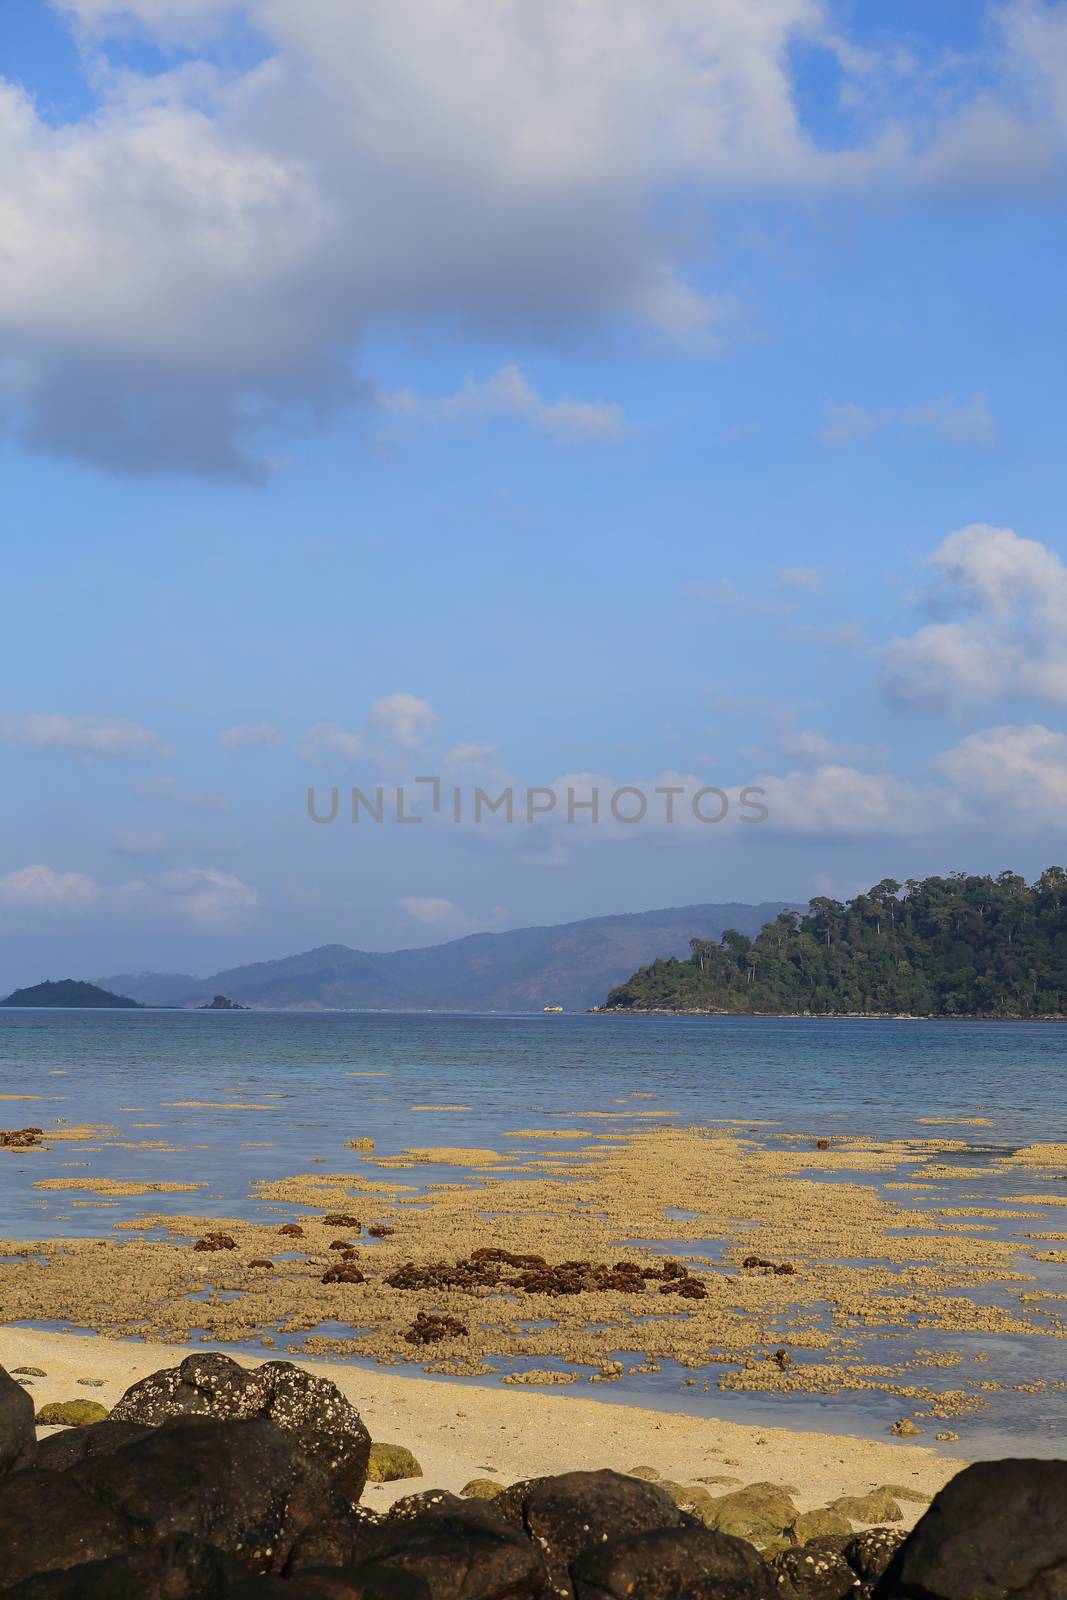 Corals in shallow waters during low tide off the coast of Lipe, Thailand.